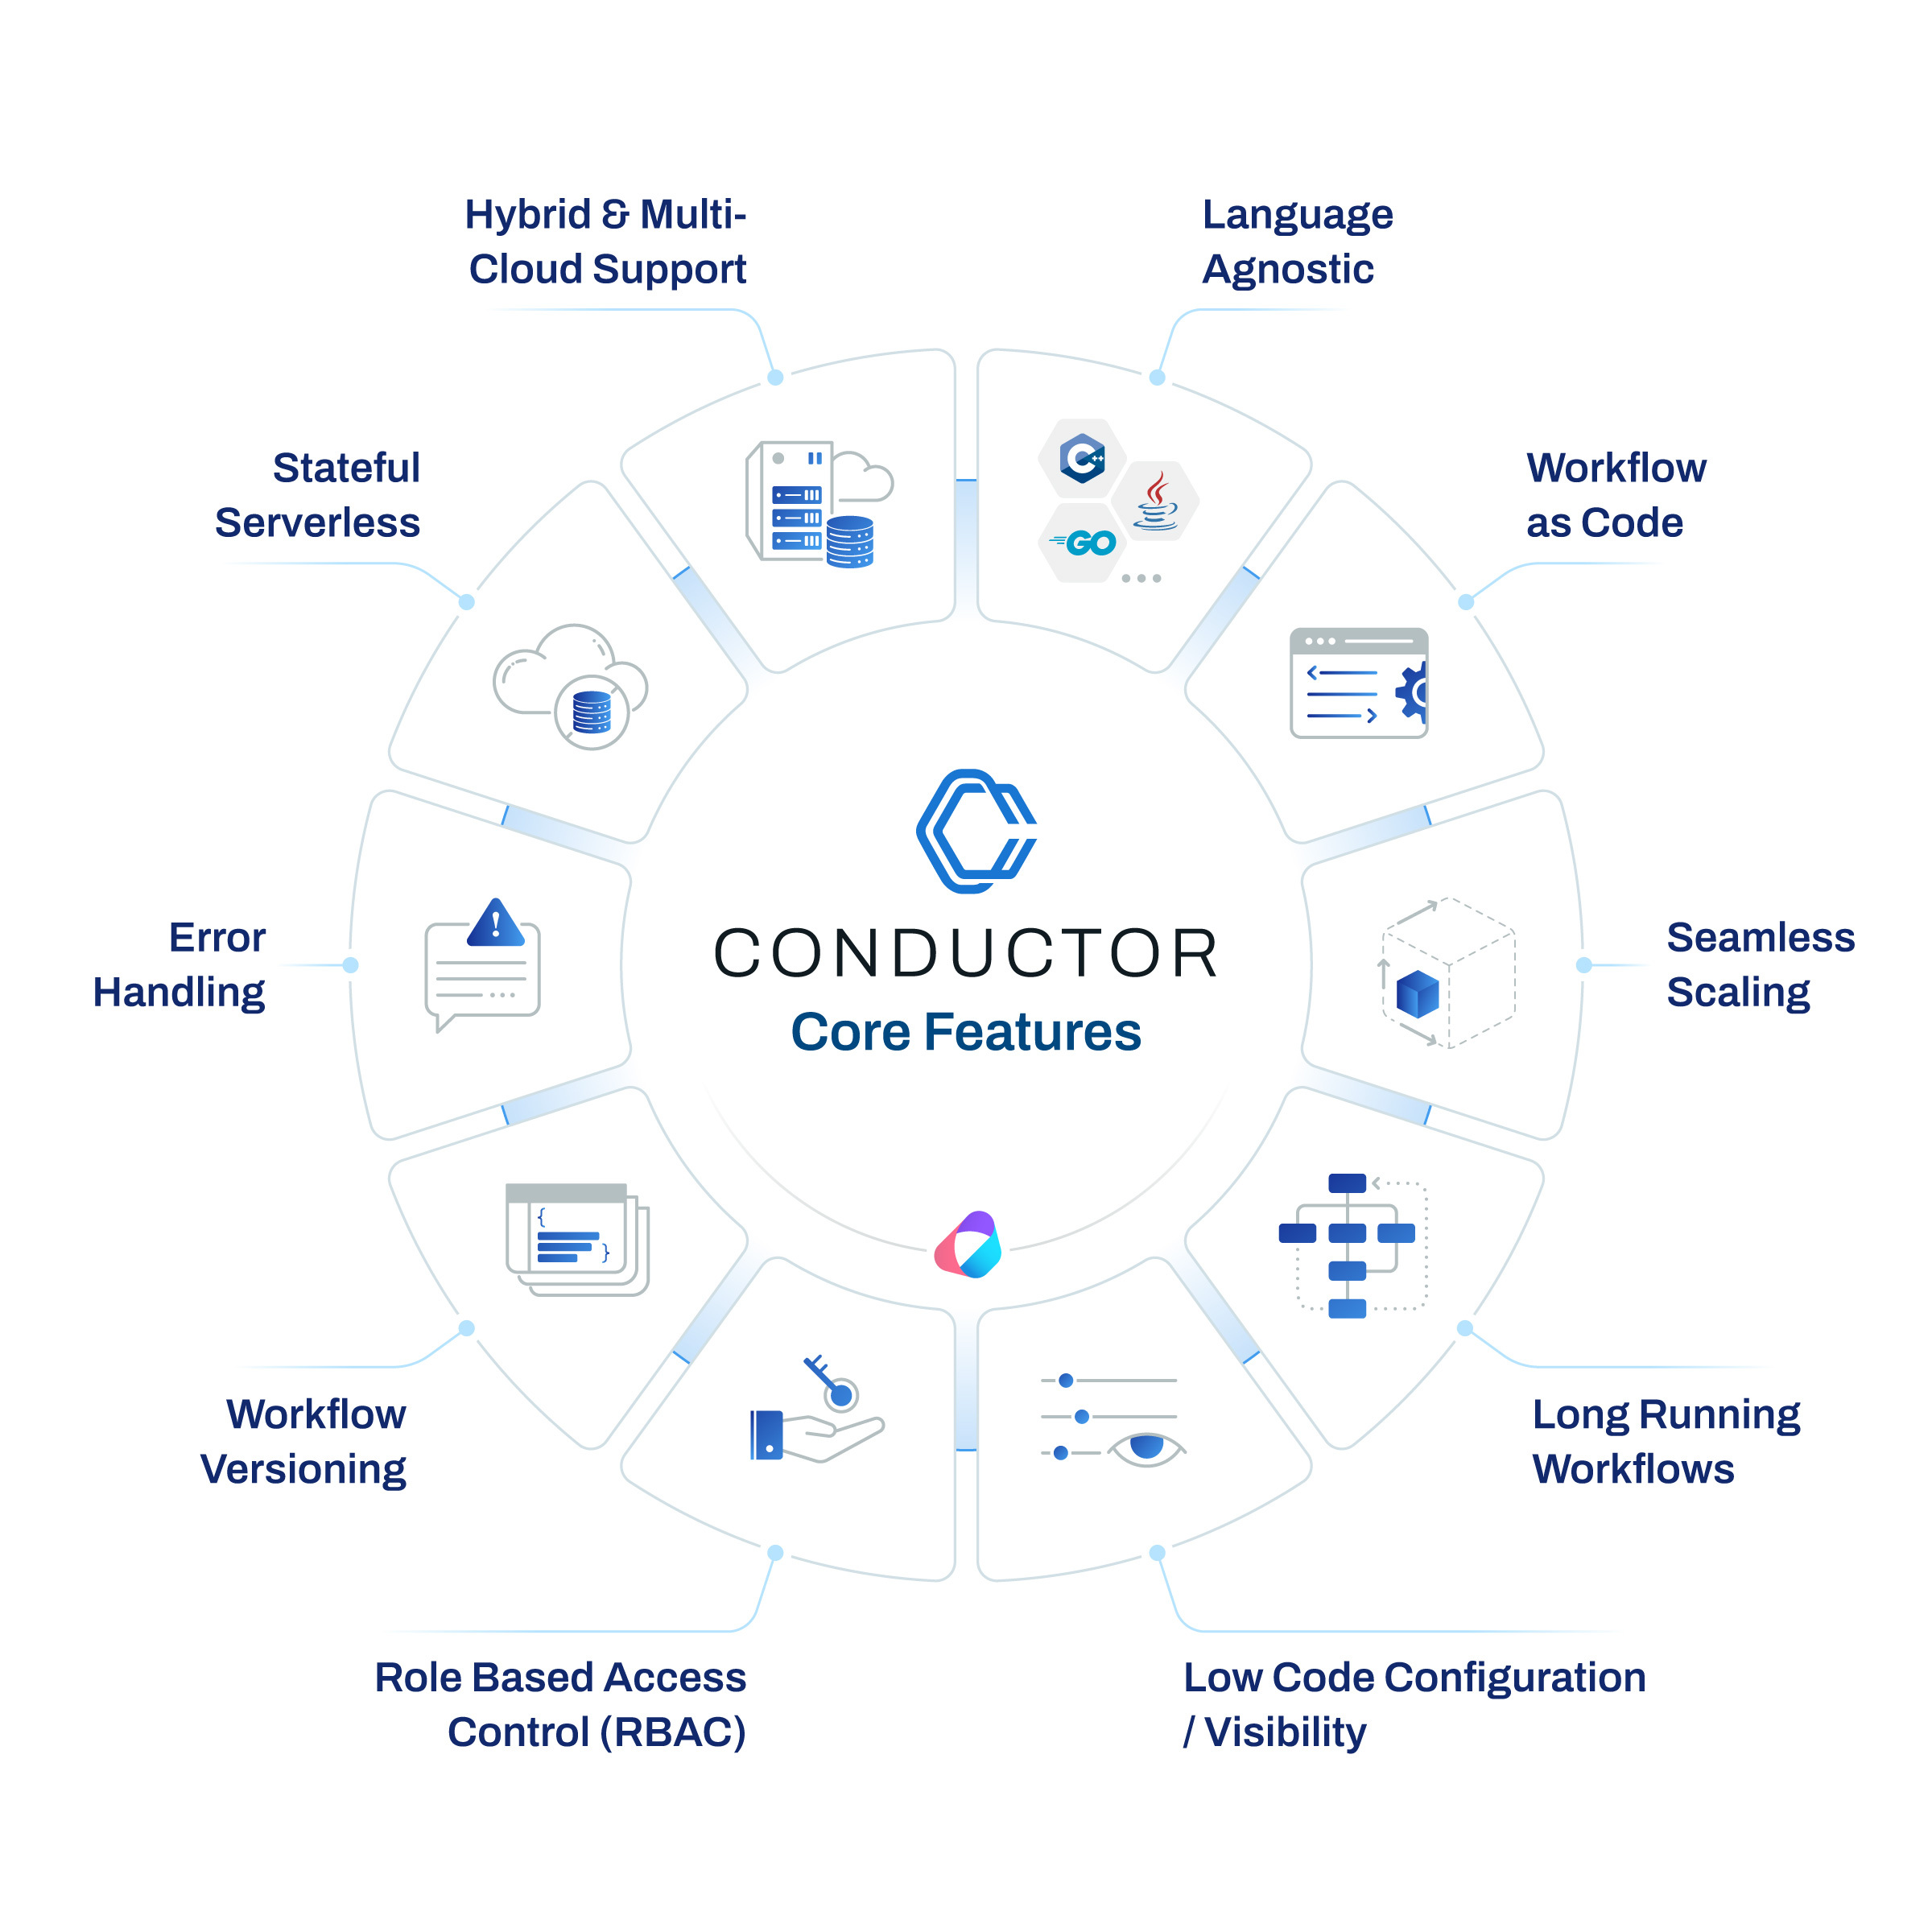 Core Features in Conductor, the Workflow Engine